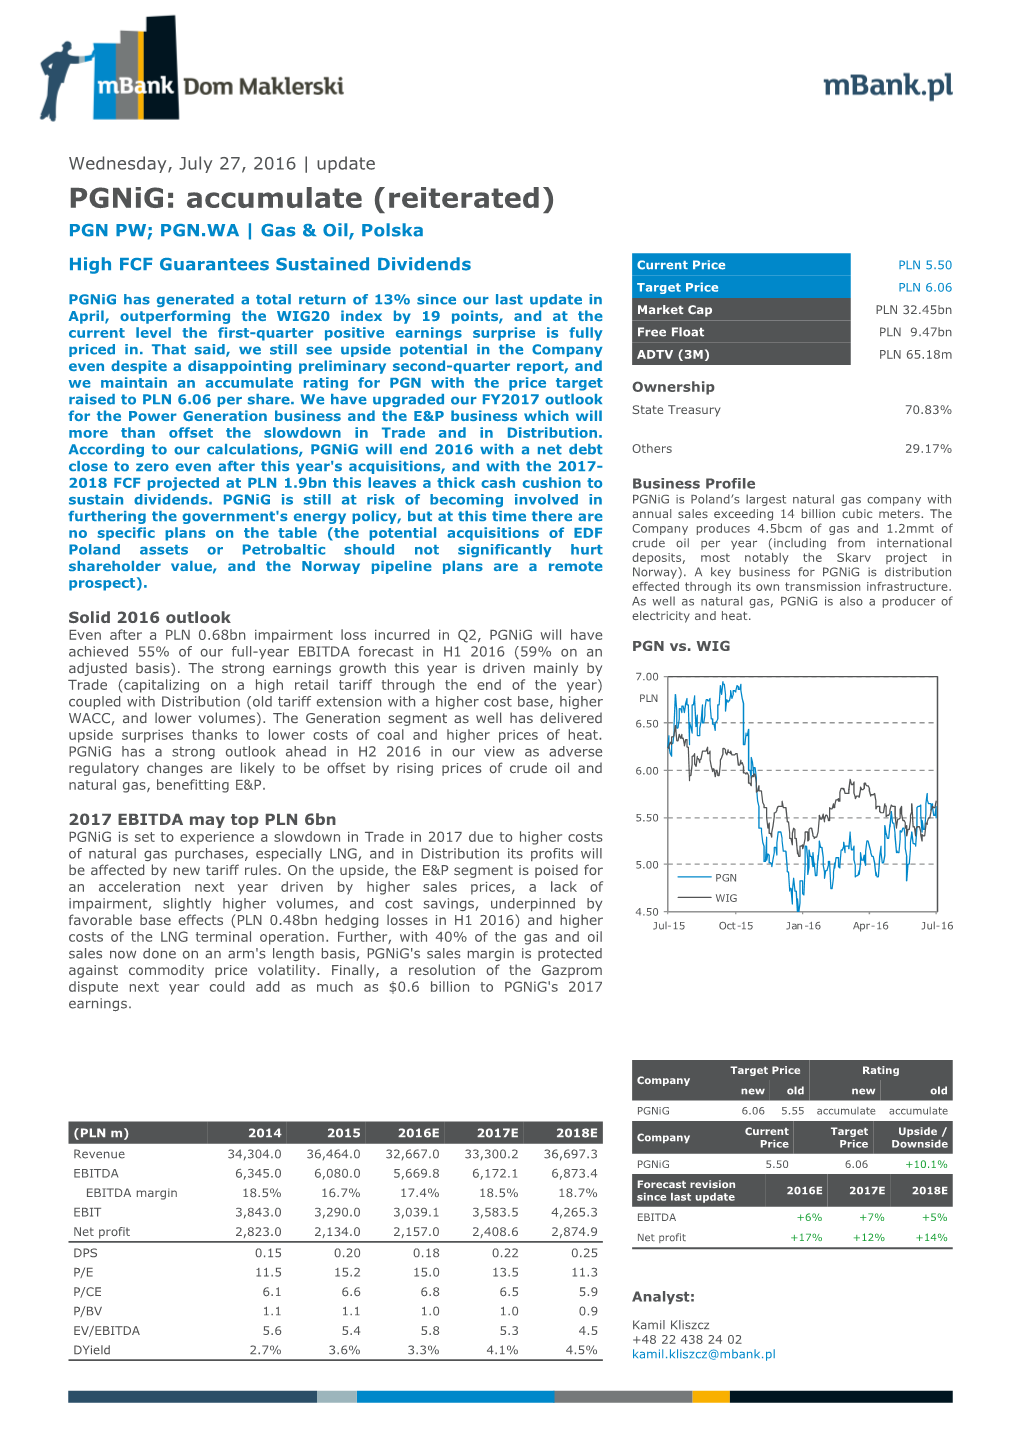 Pgnig: Accumulate (Reiterated) PGN PW; PGN.WA | Gas & Oil, Polska